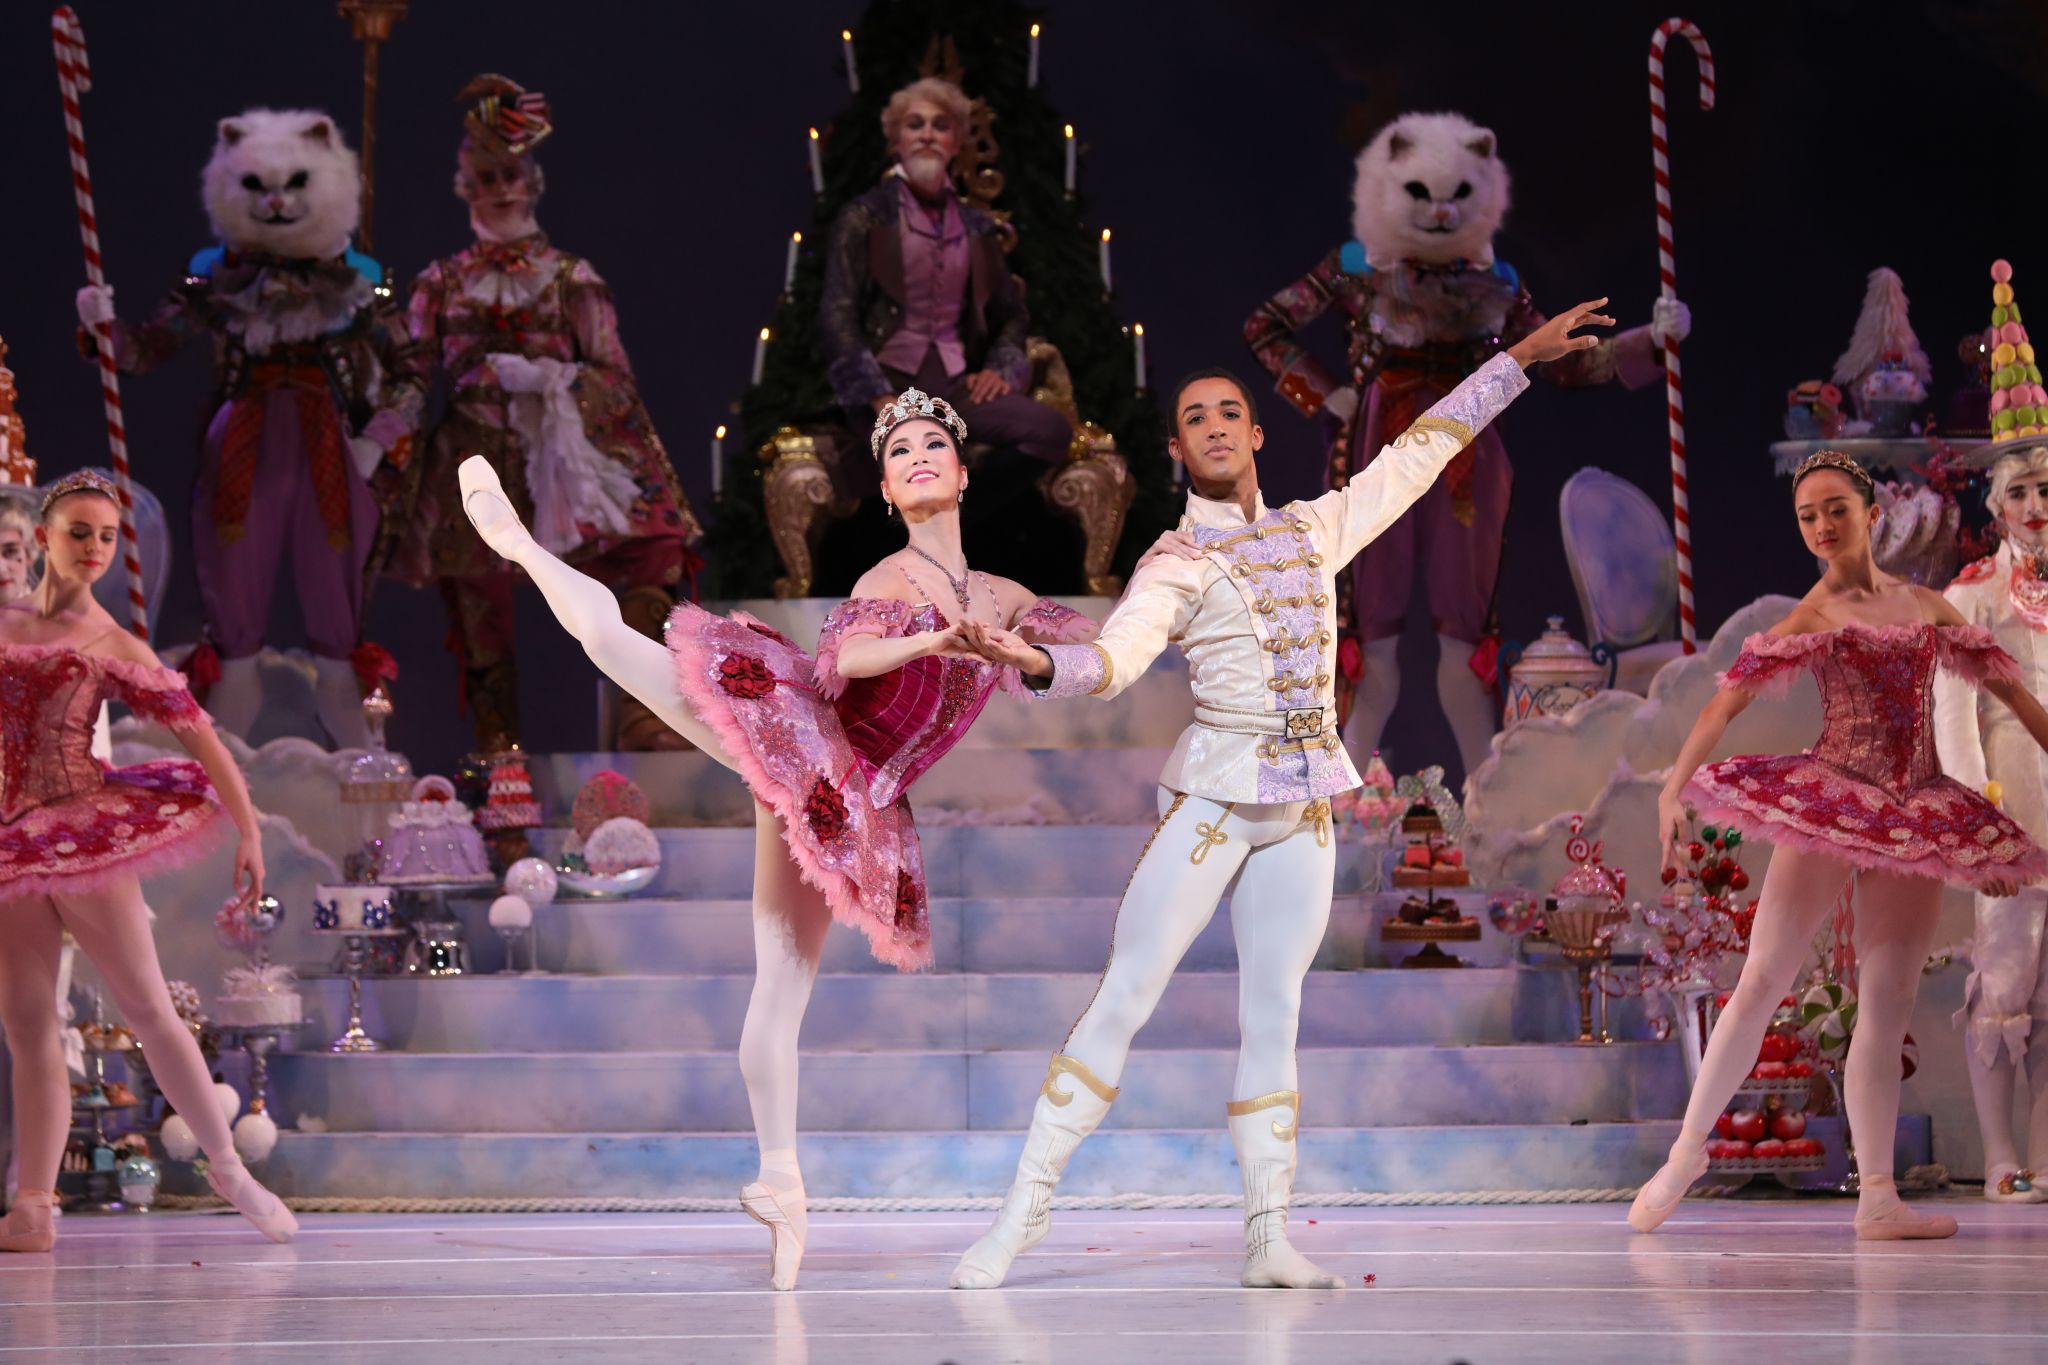 Houston Ballet's 'The Nutcracker' returns to Wortham after two years